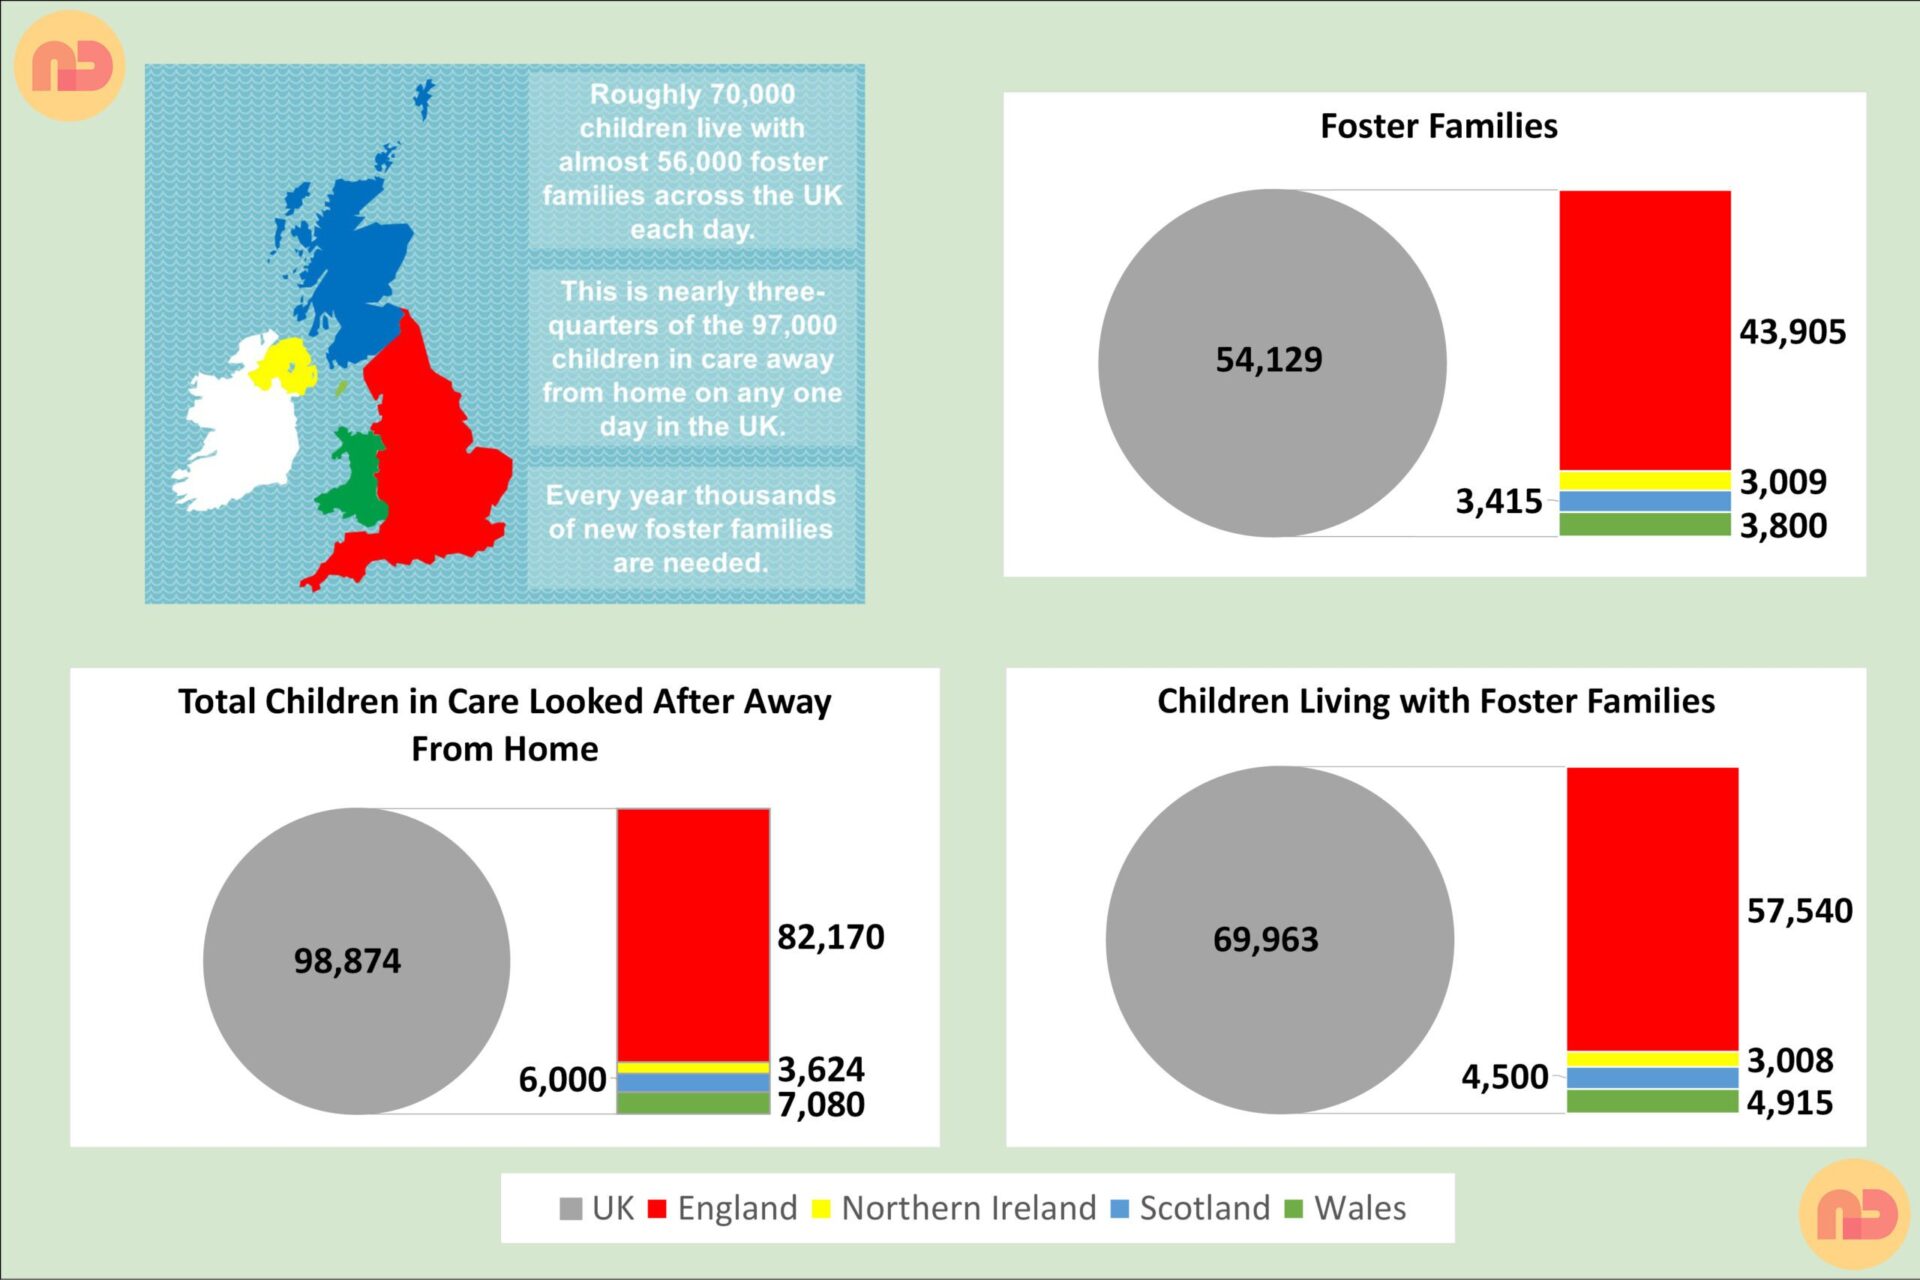 Combined Fostering Statistics Image With Logo to show a Foster Carer’s Boundless Heart